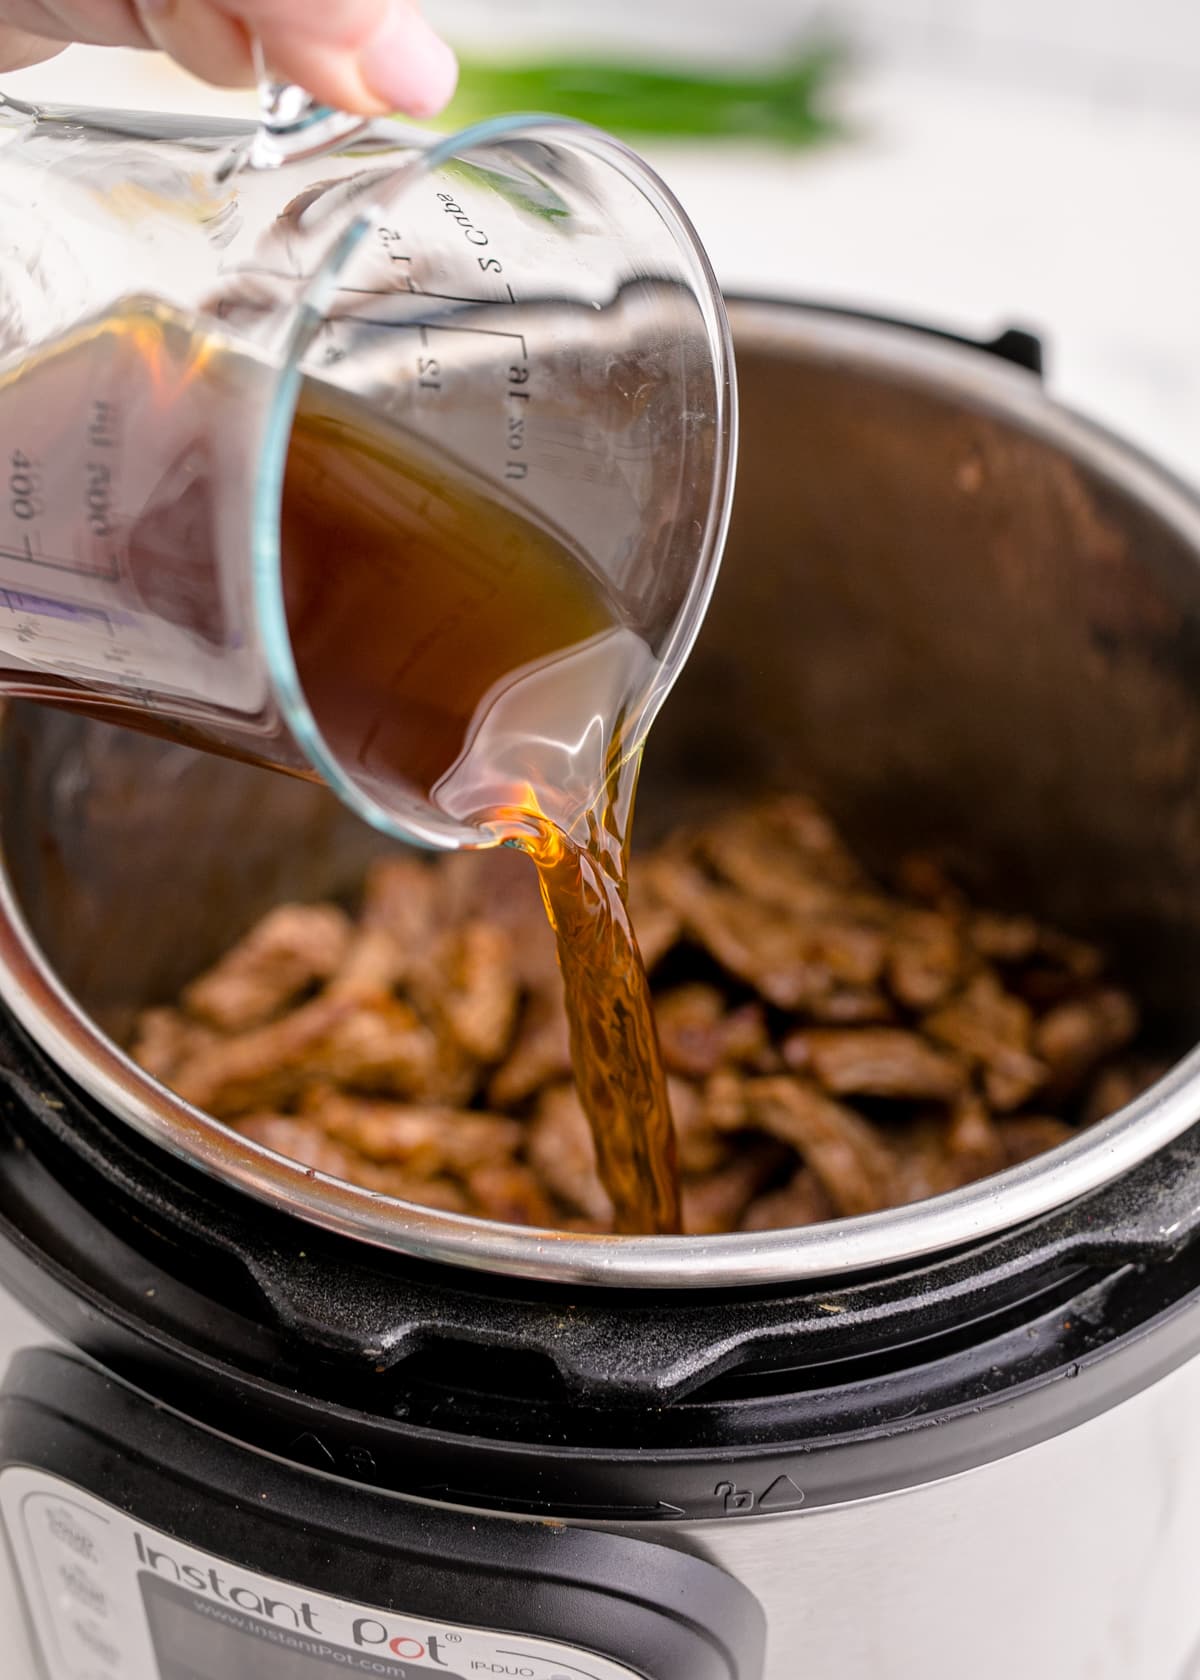 Beef broth being poured into an instant pot over cooked meat.